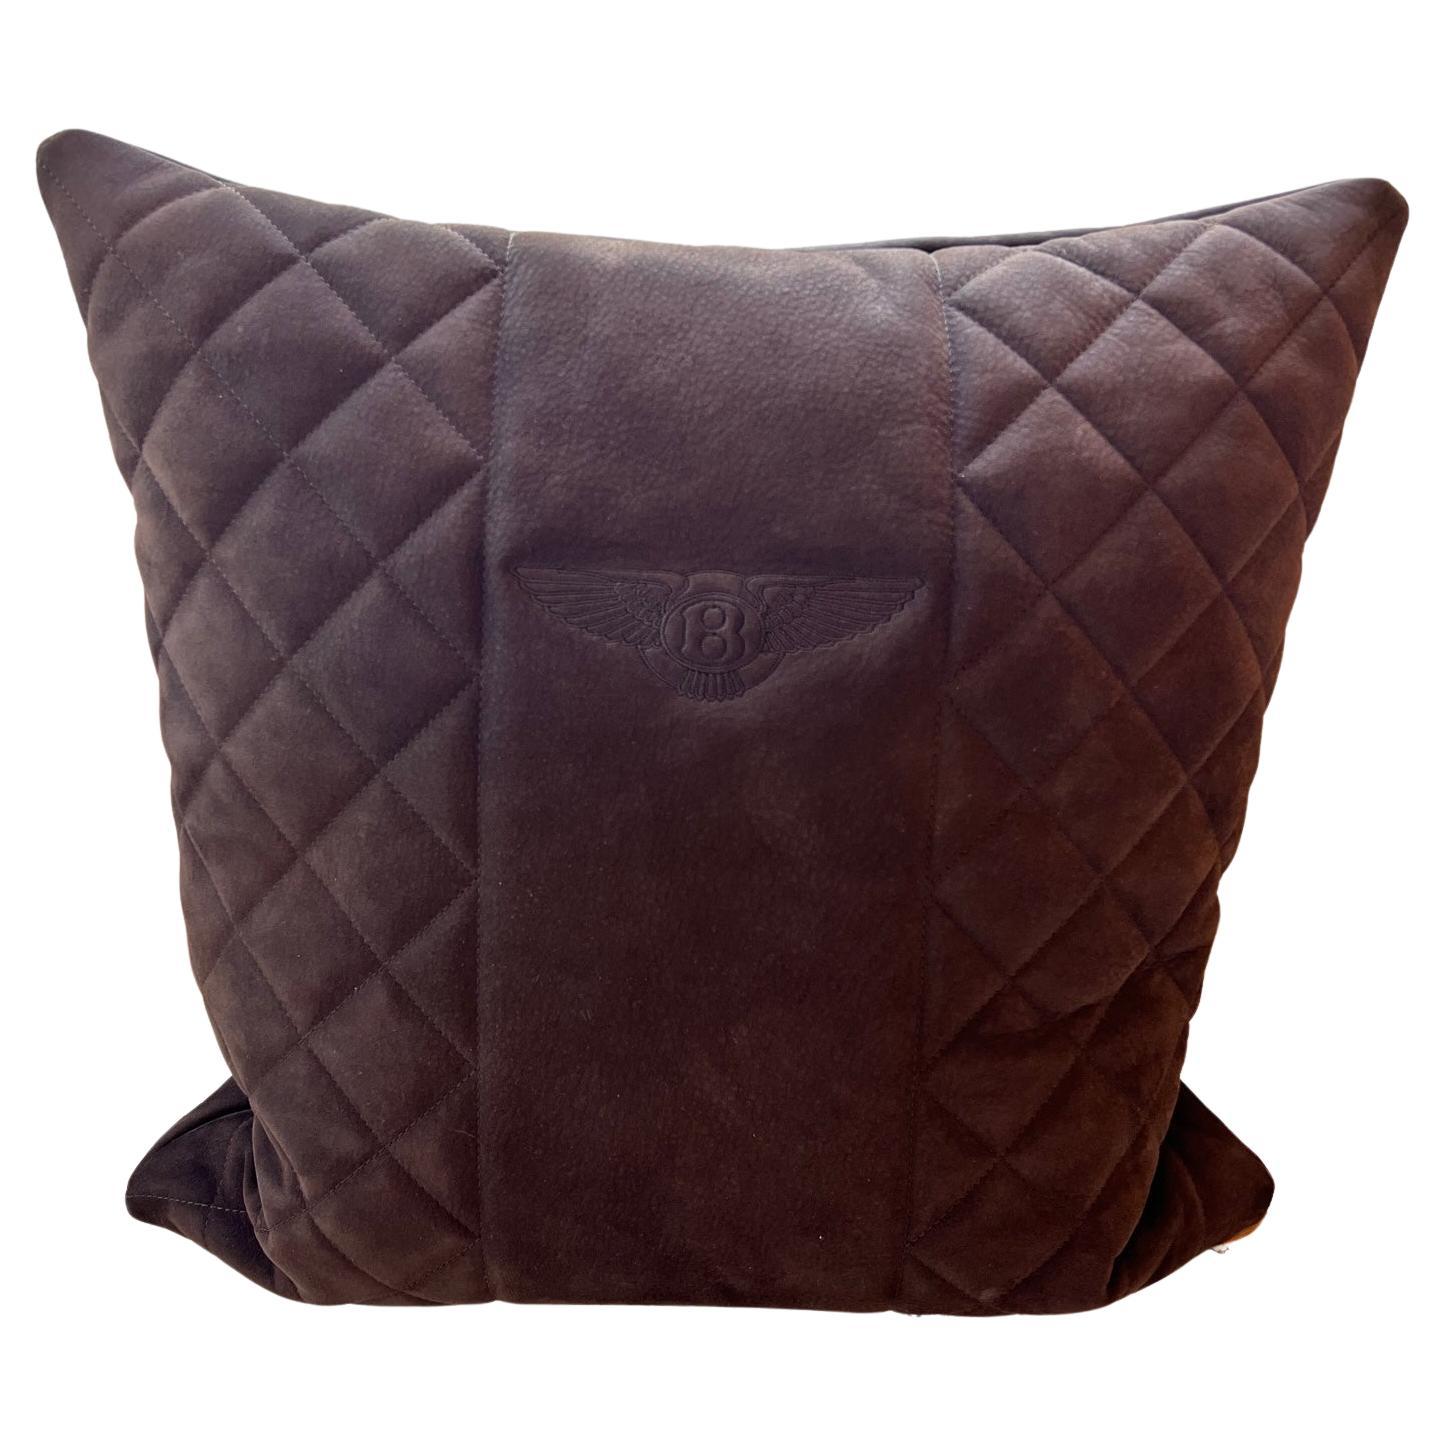 Bentley Home Chocolate brown embroidered cushions pair